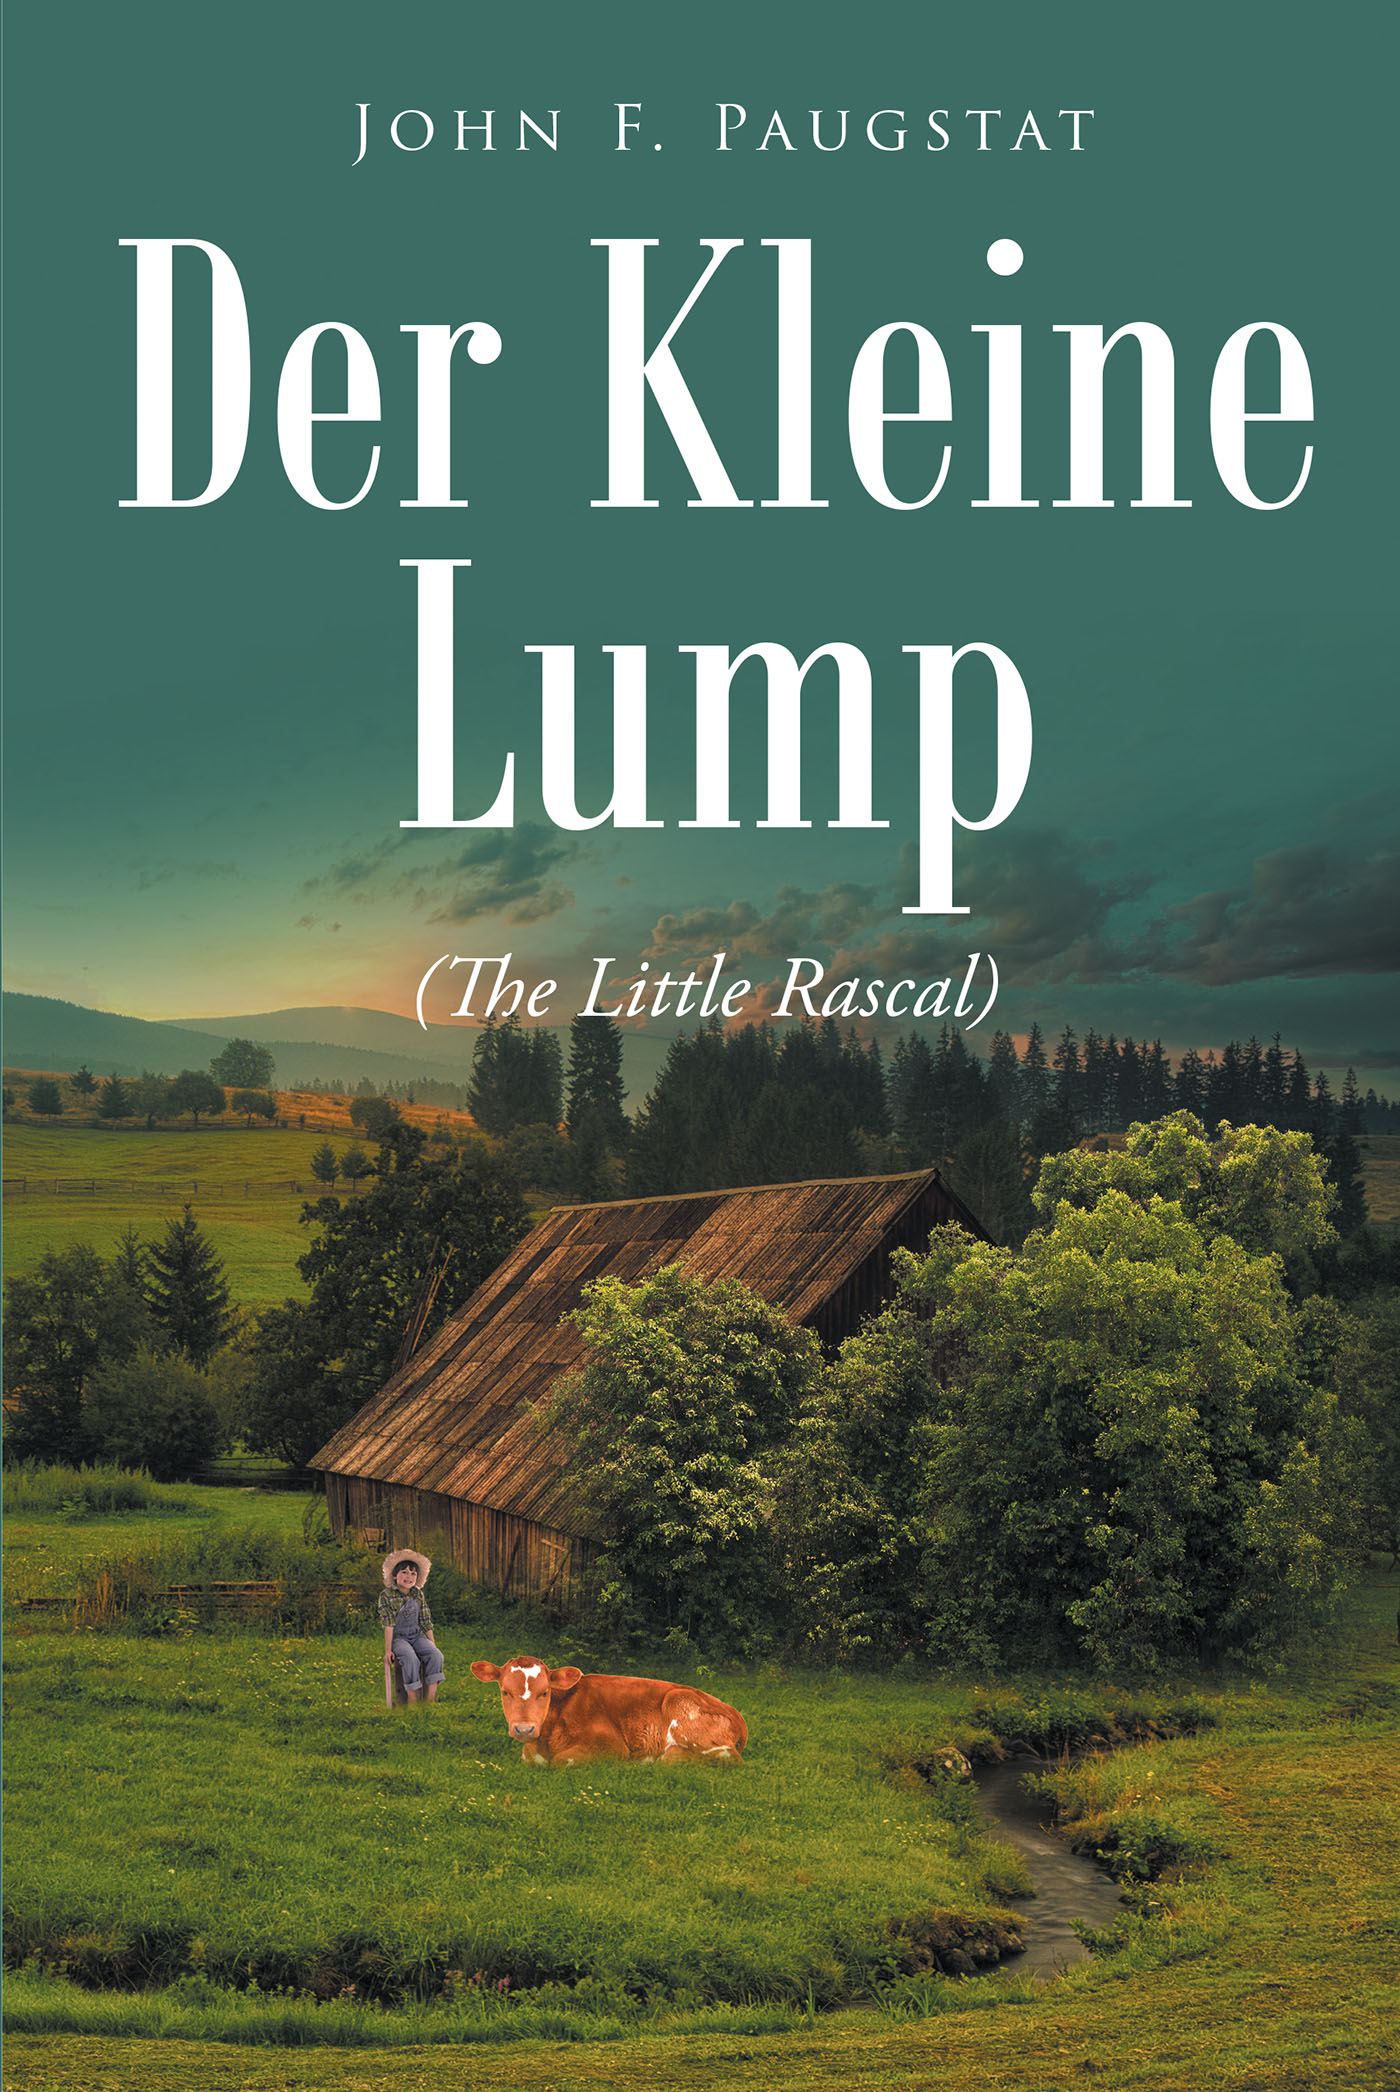 John Paugstat’s New Book, "Der Kleine Lump: The Little Rascal," Contains a Series of True Anecdotes of a Boy Who Enjoys Freedom & Adventure Despite His Harsh Realities